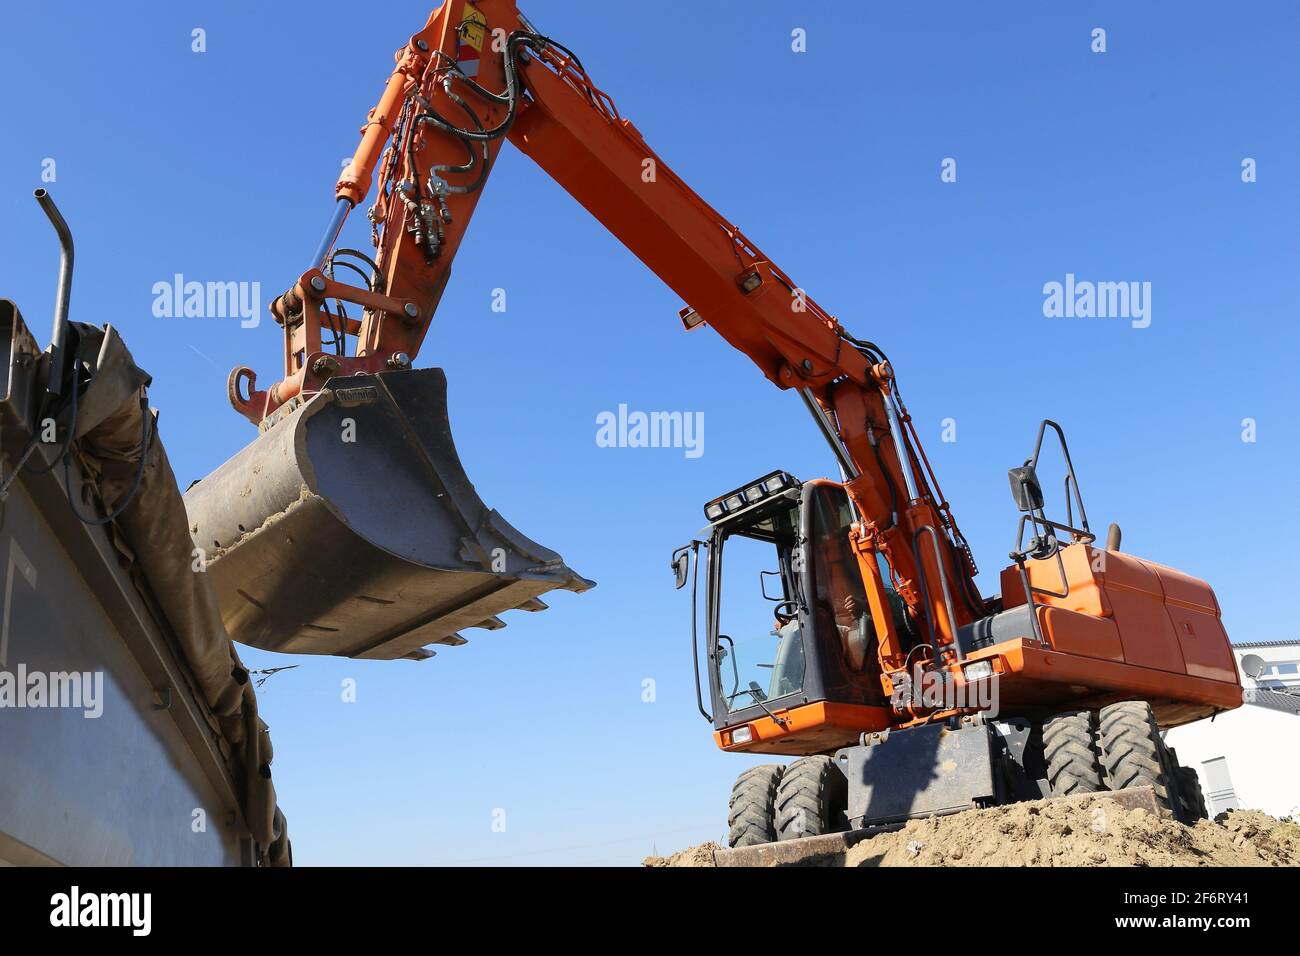 Excavation work with excavator on a building site. Stock Photo